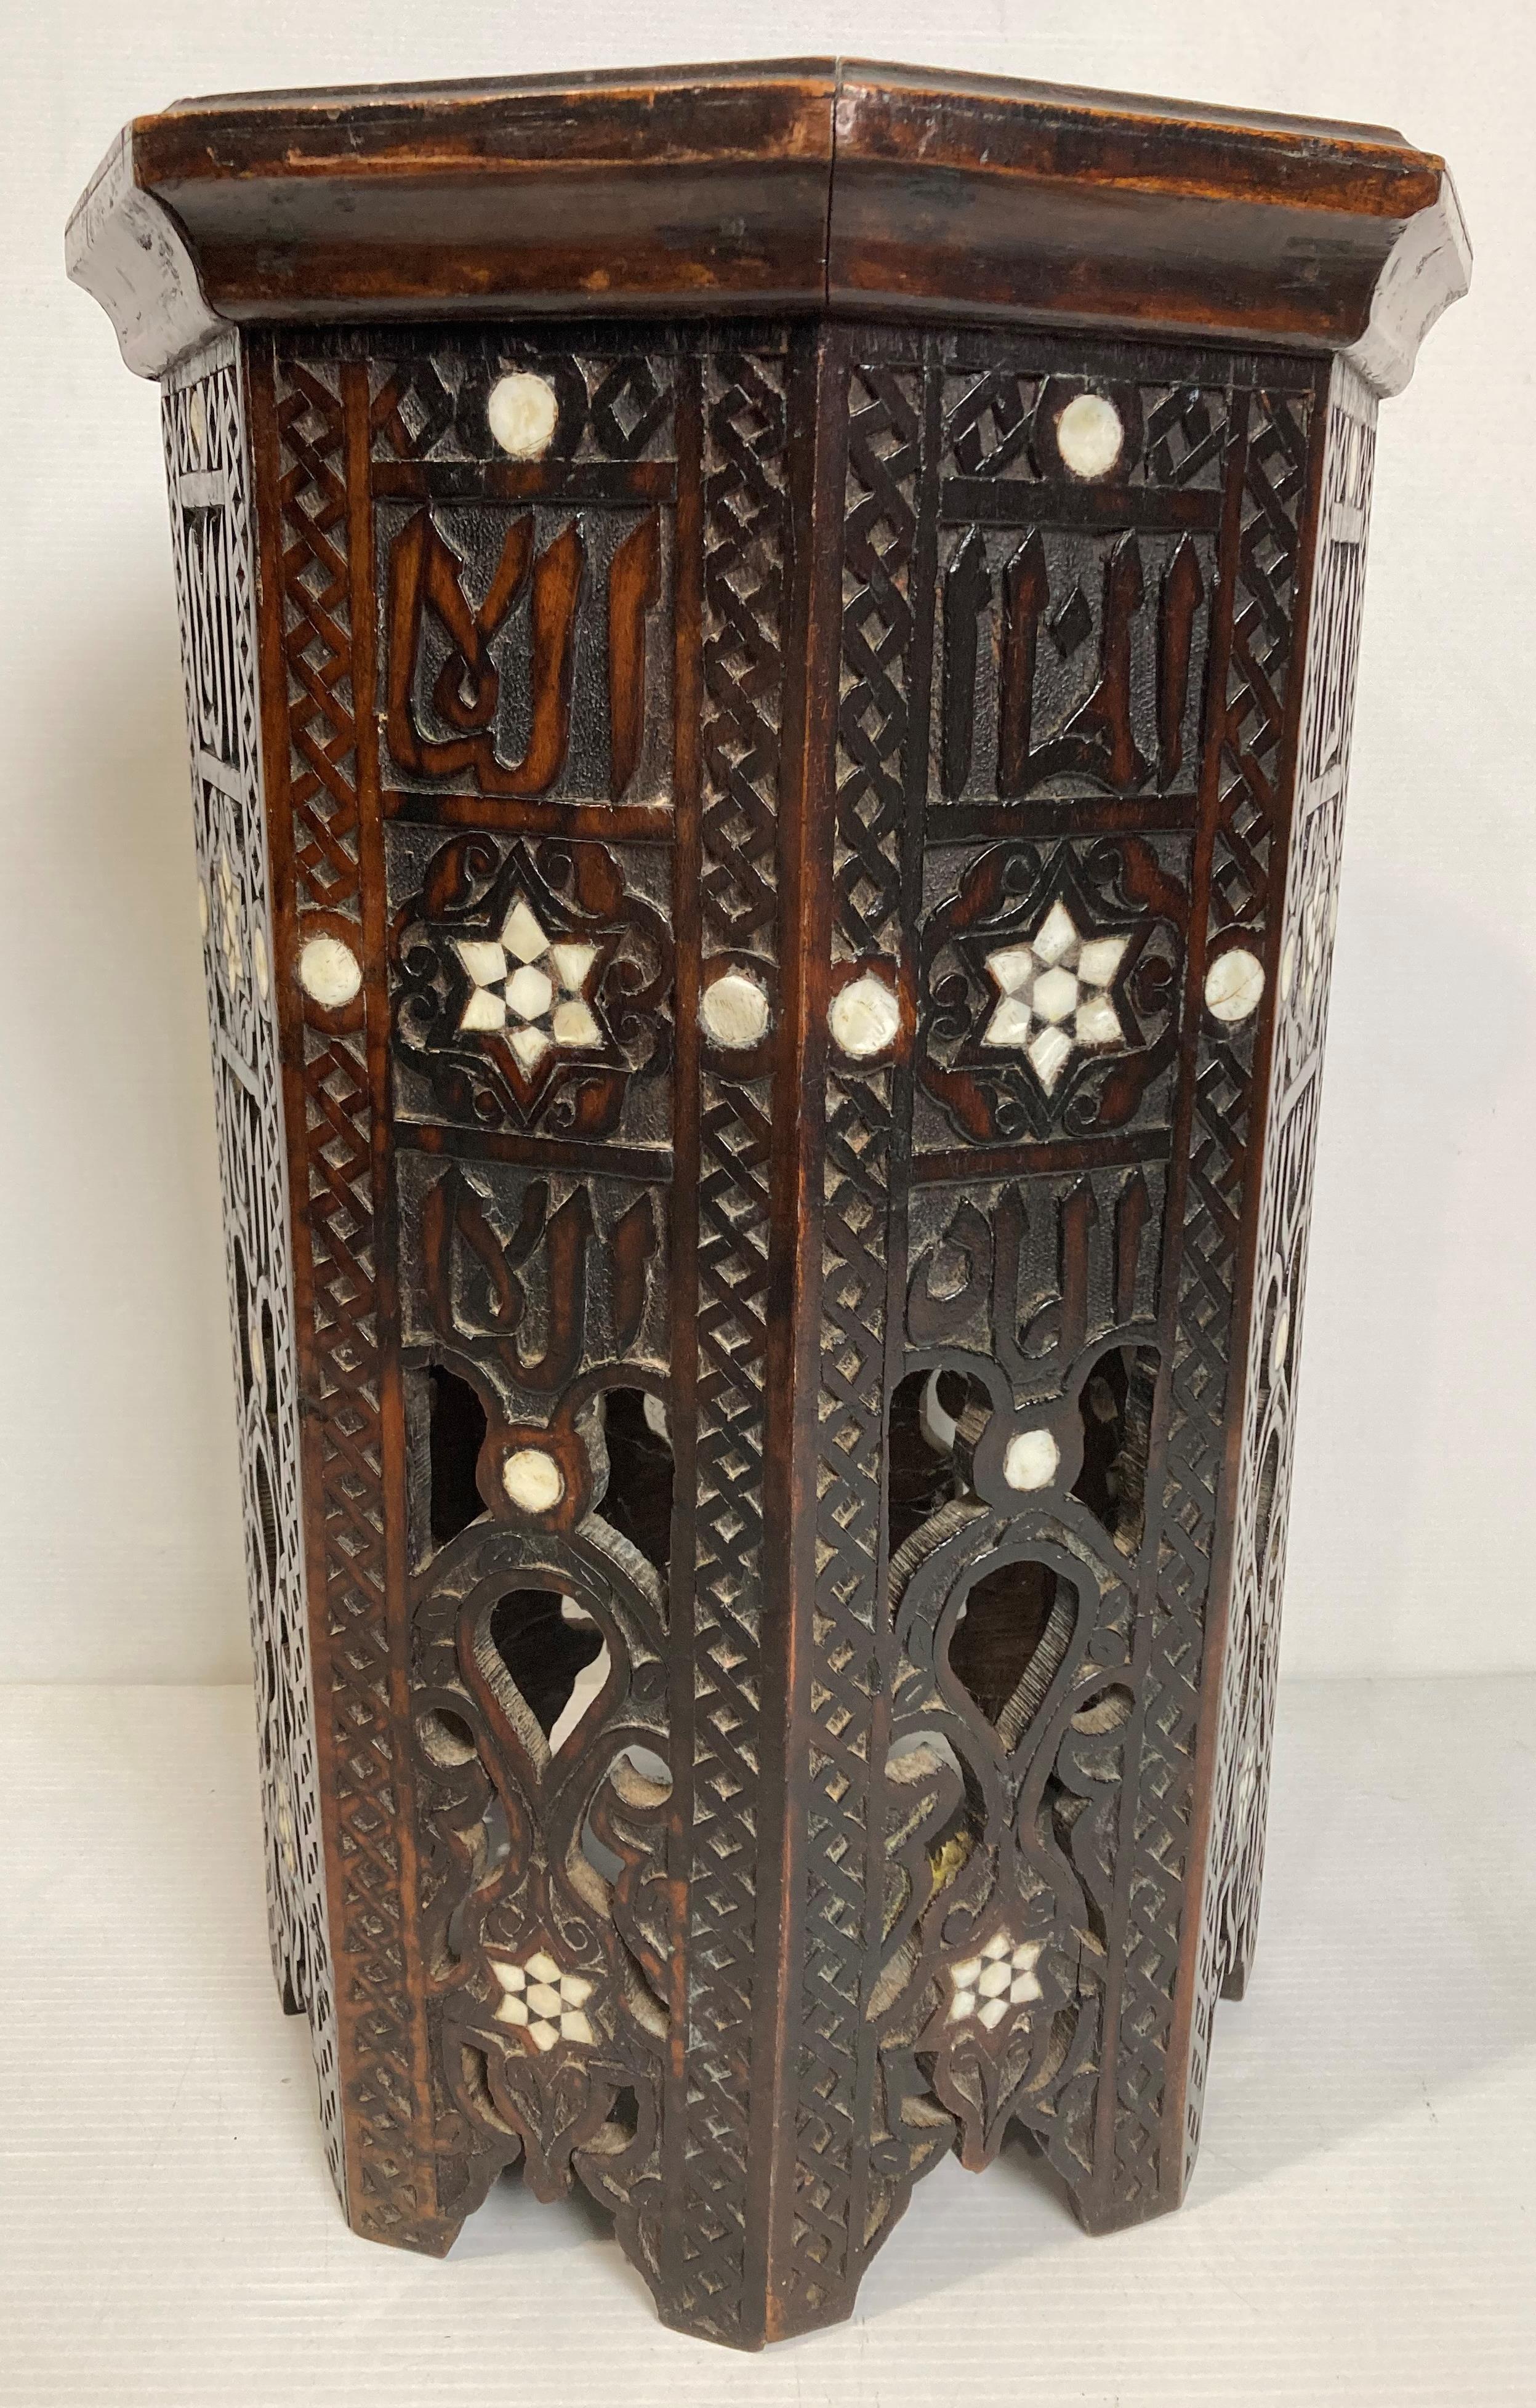 A hand-carved wooden Moorish eastern octagonal side table with mother of pearl inlay, - Image 4 of 6